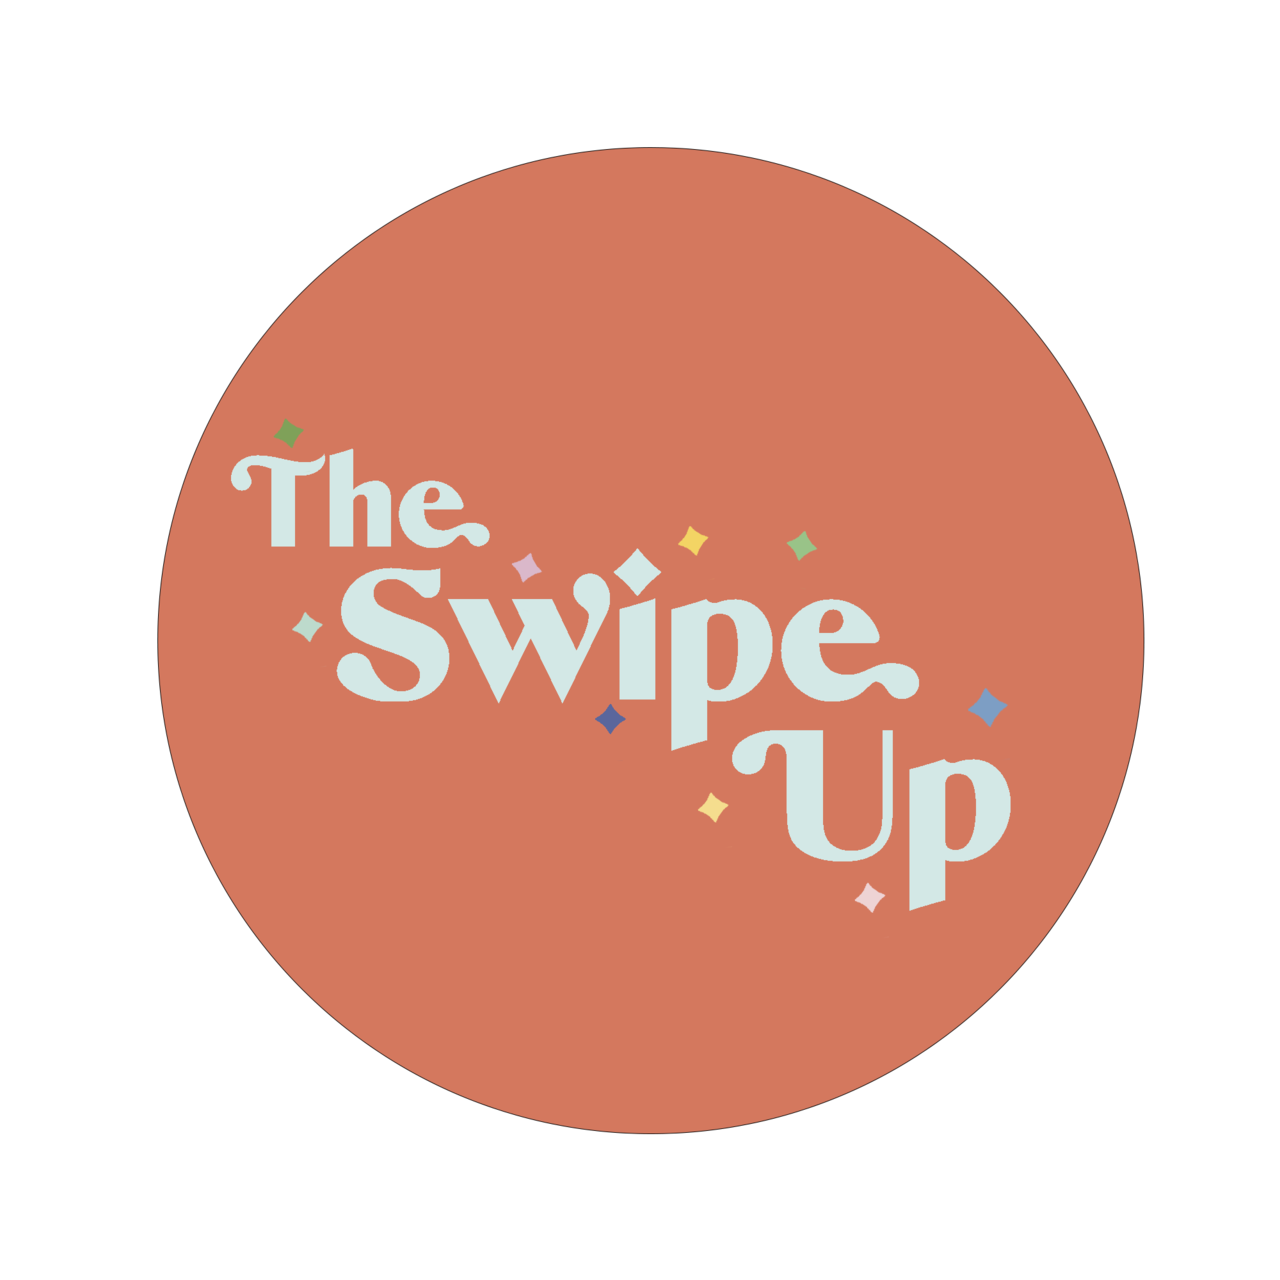 Artwork for The Swipe Up: A Newsletter from Your Internet Friend